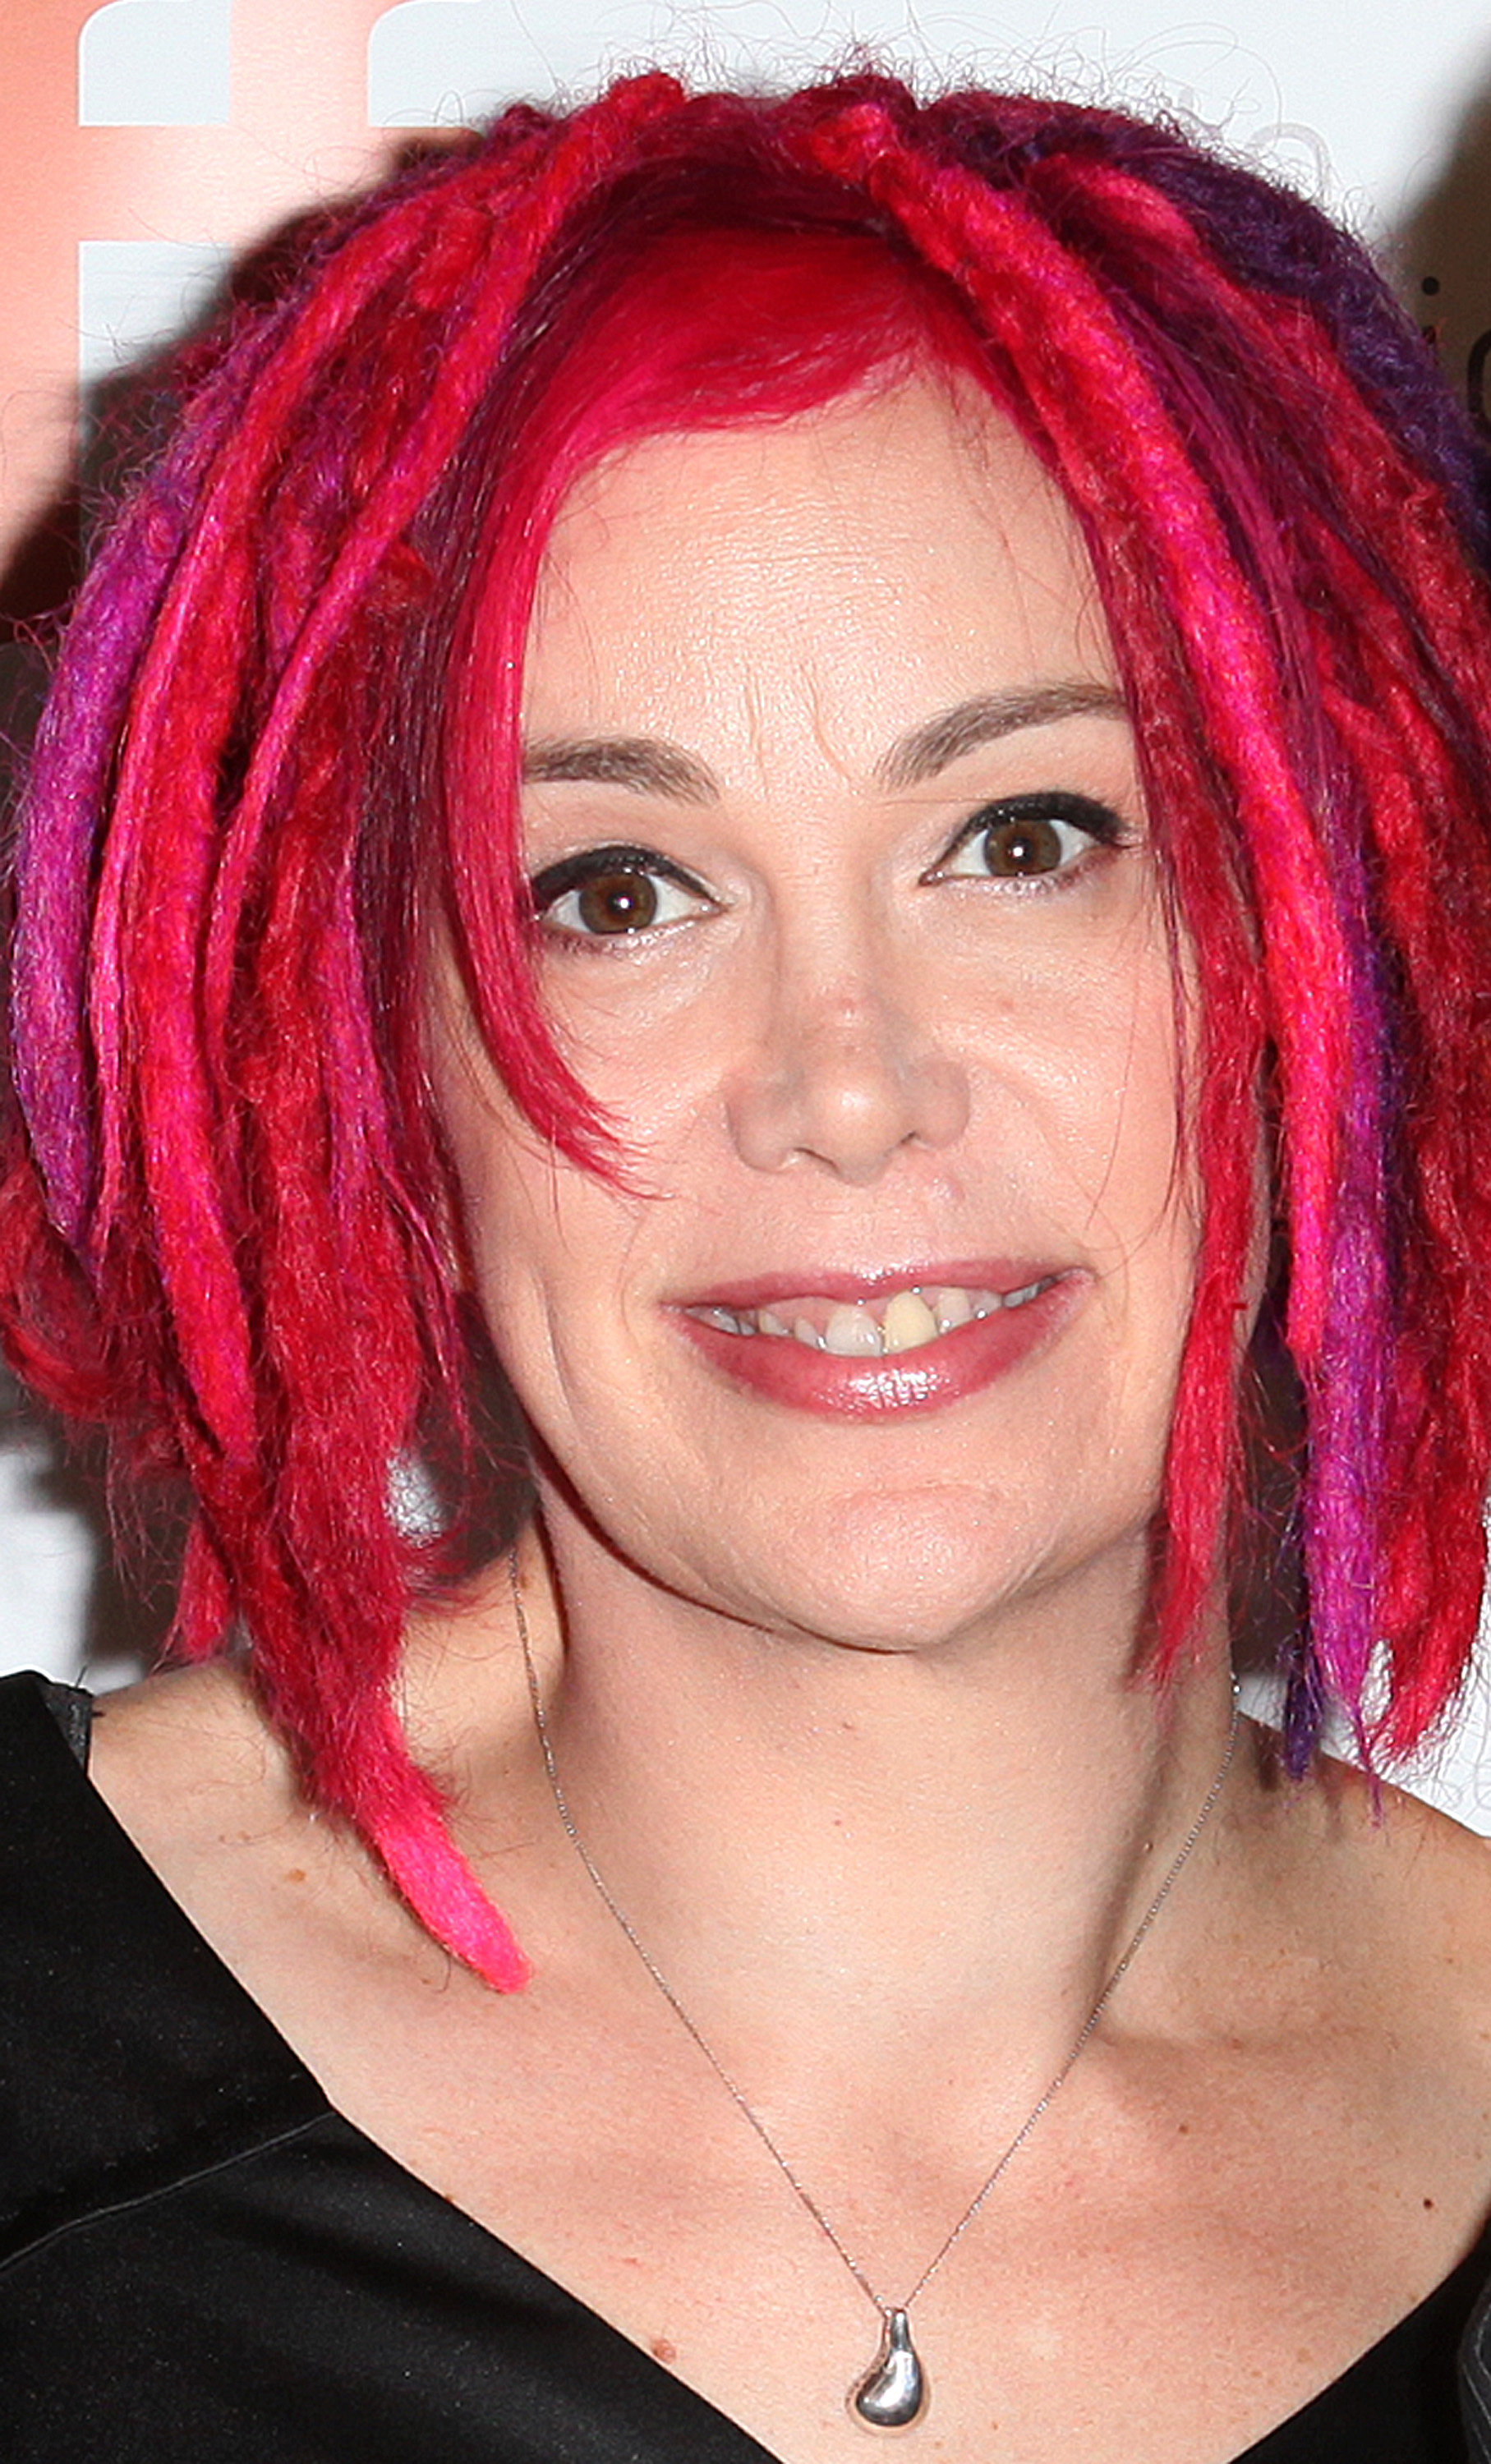 Lana Wachowski at the The 2012 Toronto International Film Festival on September 8, 2012 in Toronto, Canada. | Source: Getty Images